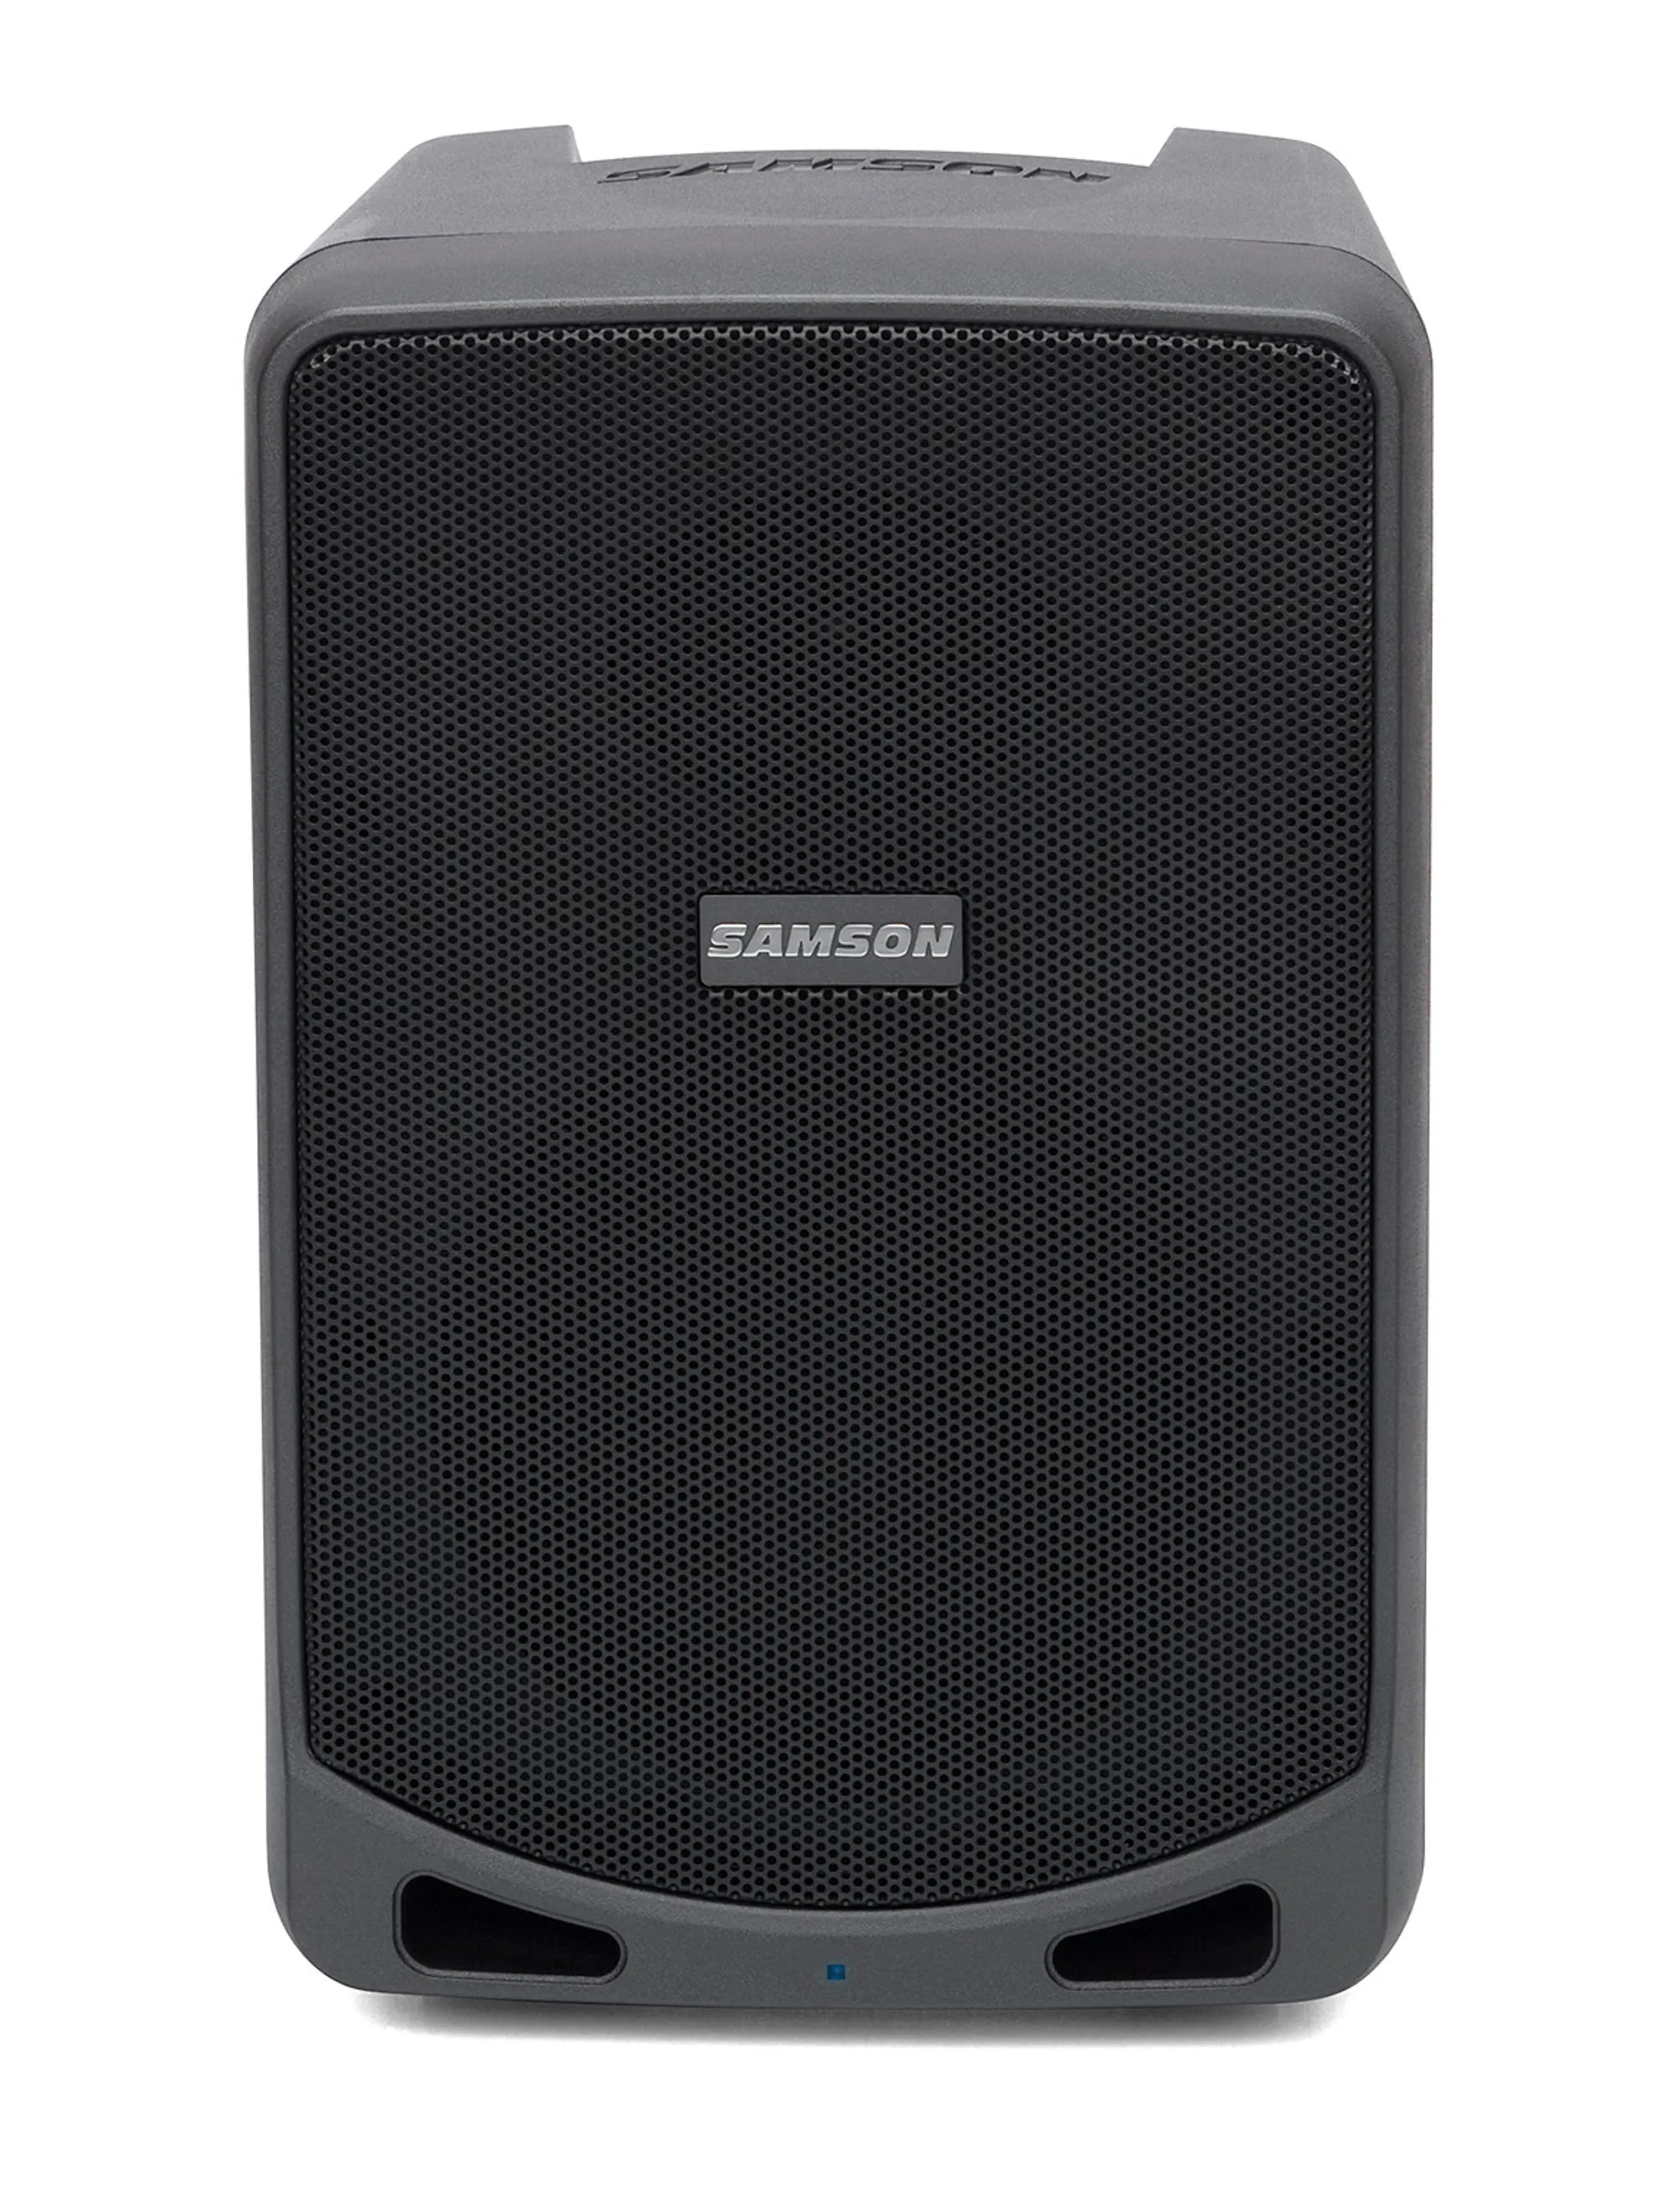 Samson Expedition XP106W Rechargable Portable PA System